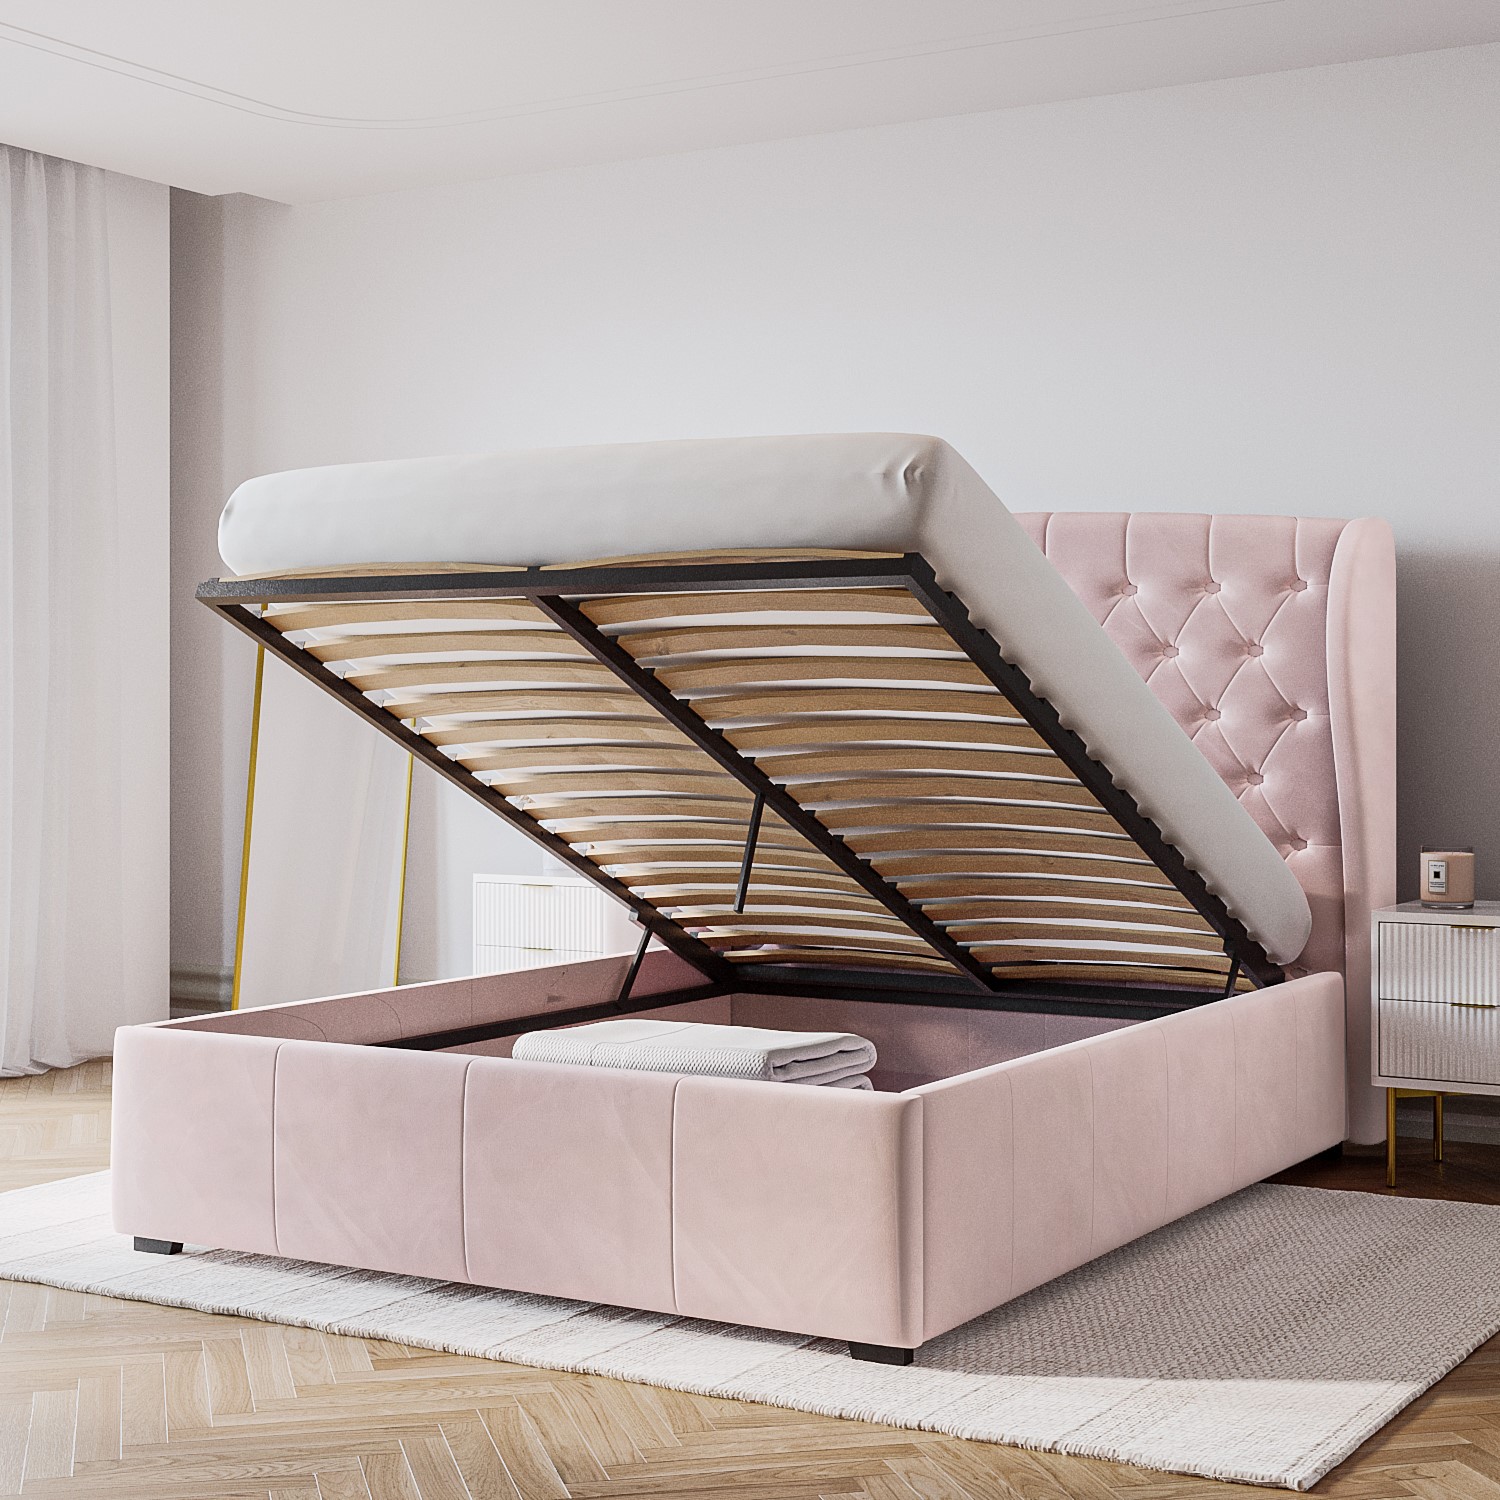 Read more about Pink velvet double ottoman bed with winged headboard safina